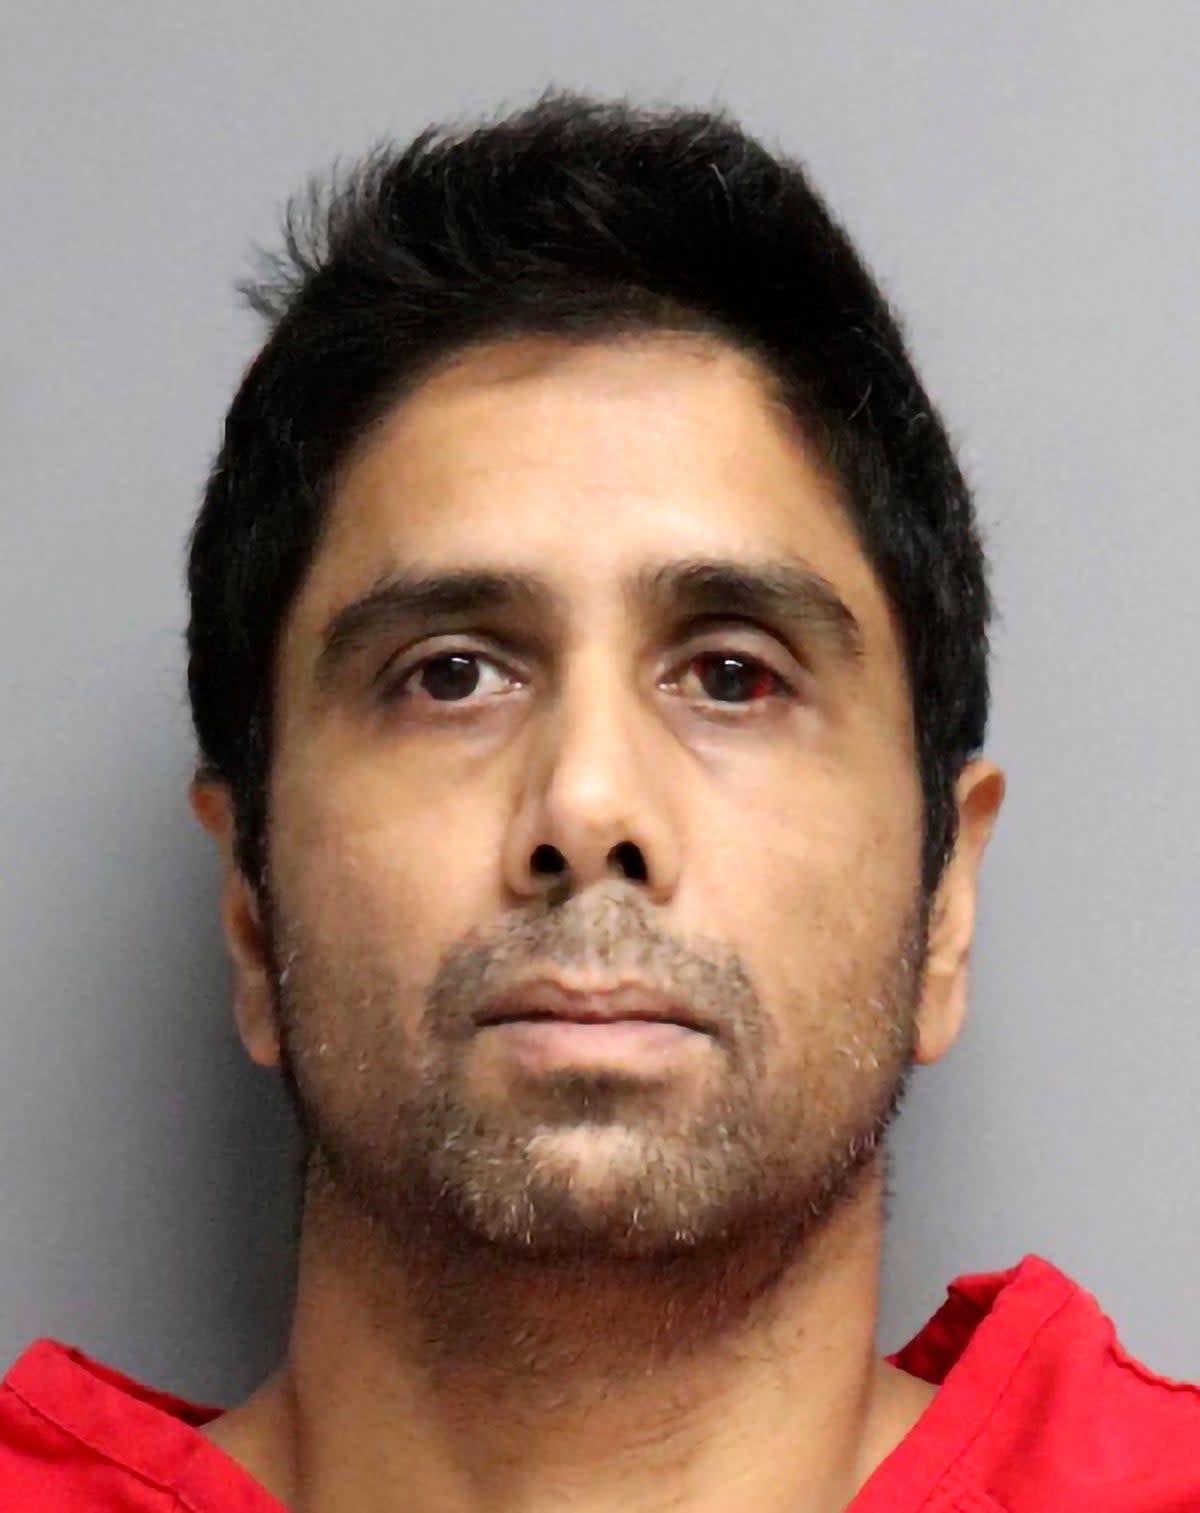 Dharmesh Patel, pictured last year, faces attempted murder charges after prosecutors say he drove his wife and two children off a cliff in California (San Mateo County Sheriff’s Office)